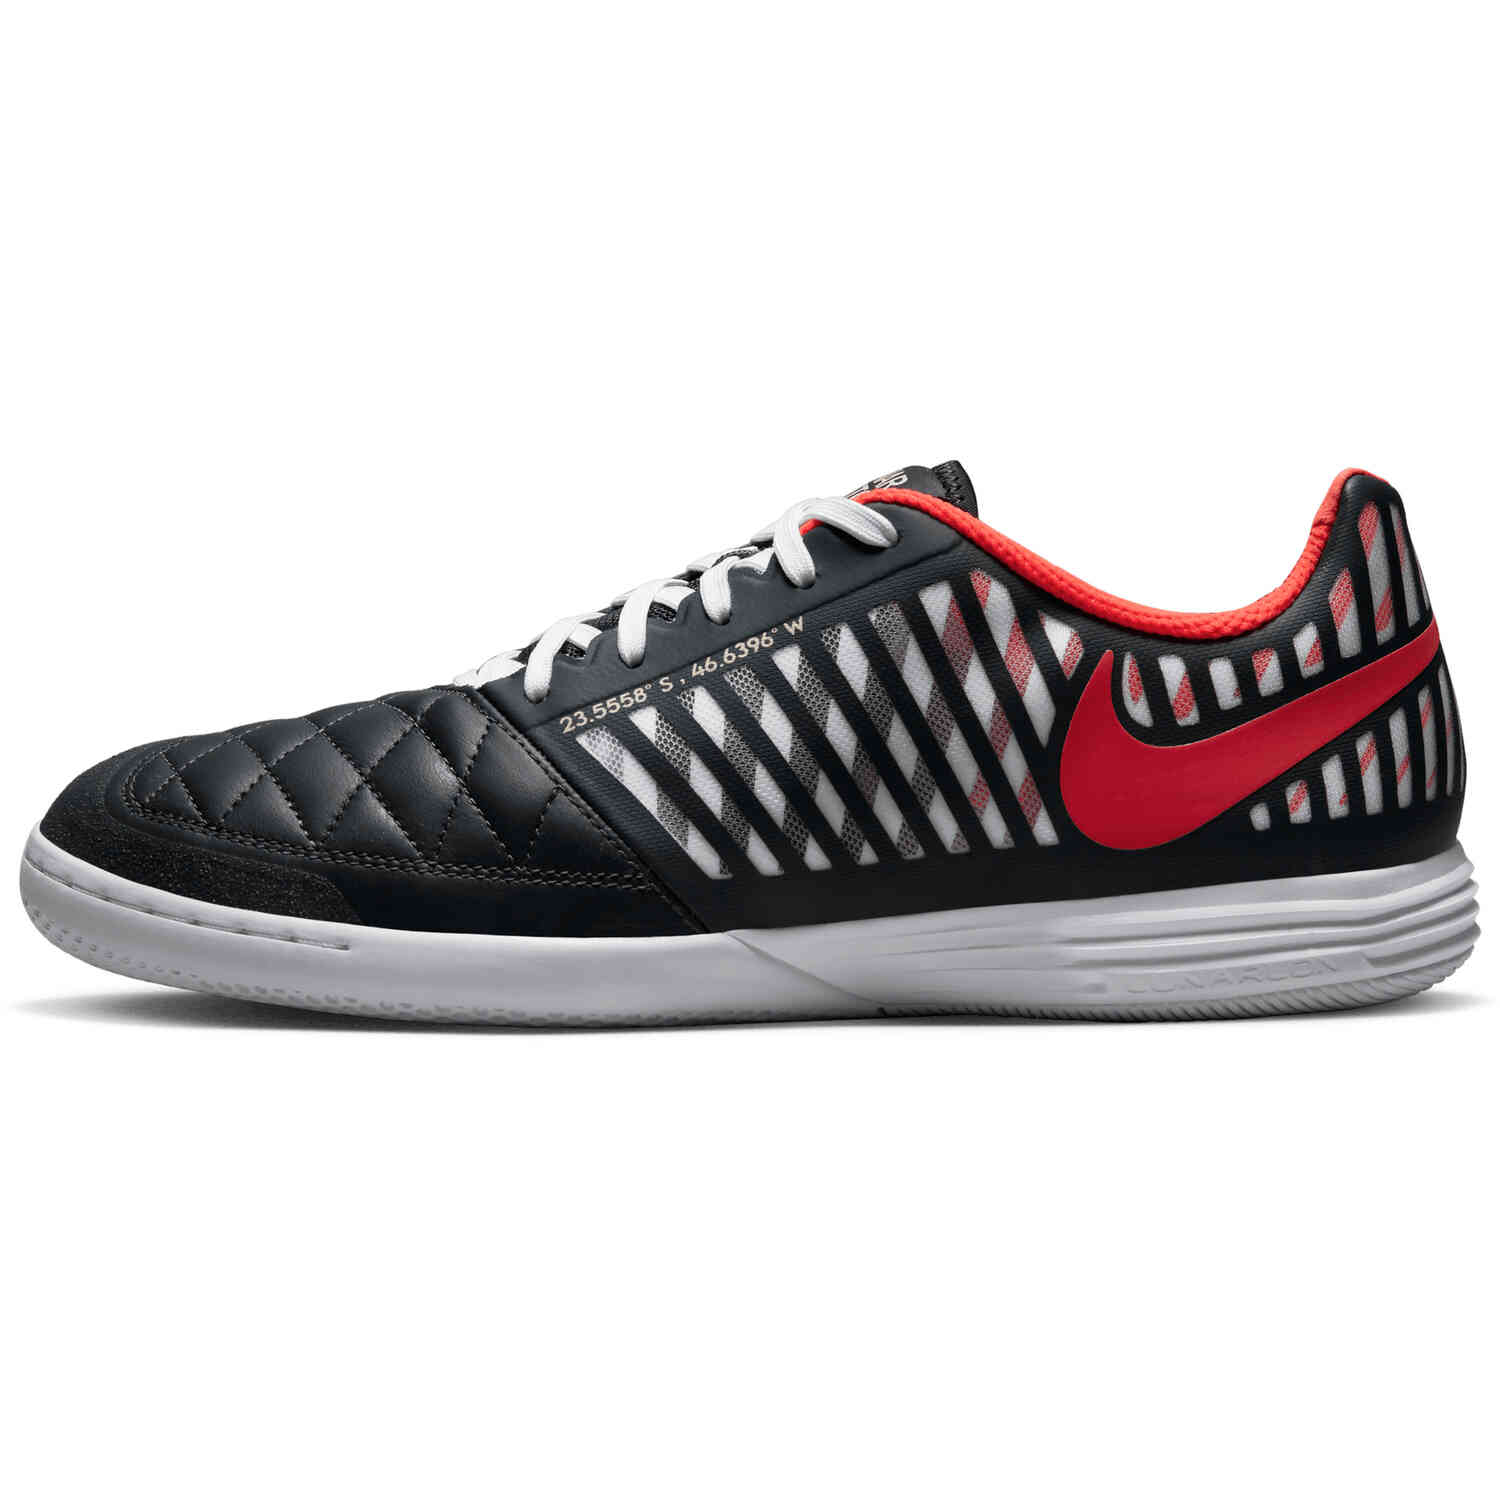 Manifiesto Logro Ladrillo Nike Lunar Gato II IC Indoor Soccer Shoes - Anthracite, Infrared 23, White  & Team Gold - Soccer Master